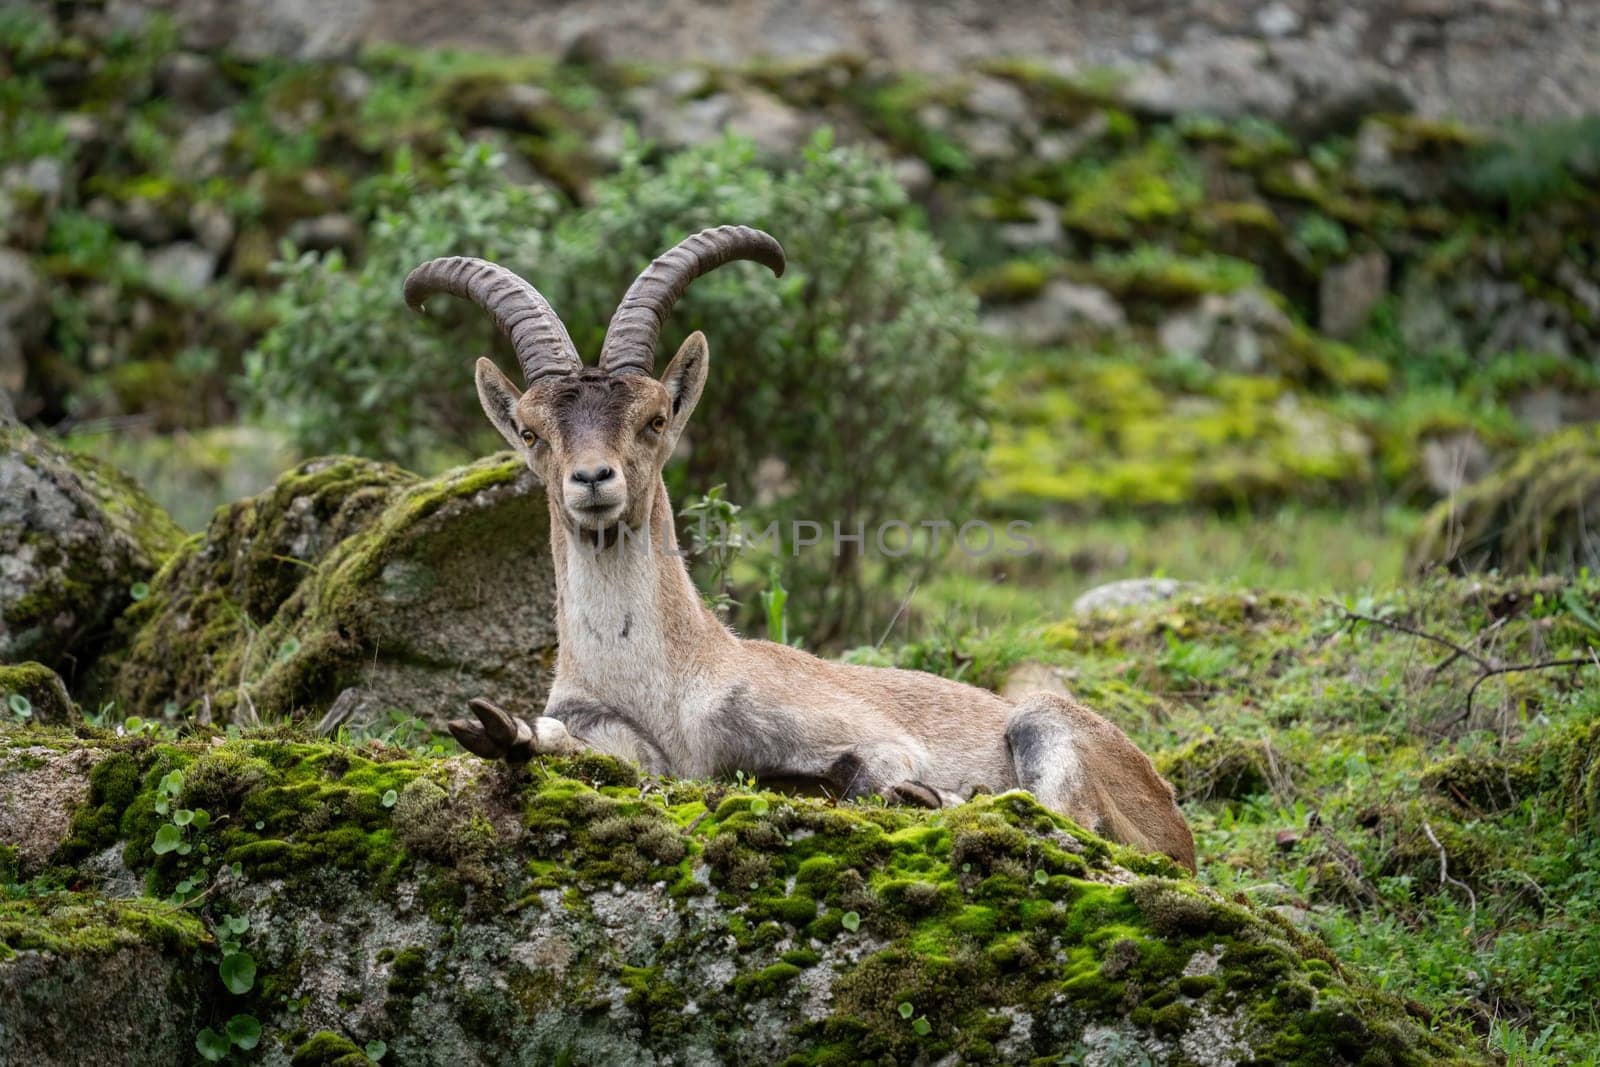 Majestic Ibex Resting on a Mossy Rock in Nature by FerradalFCG